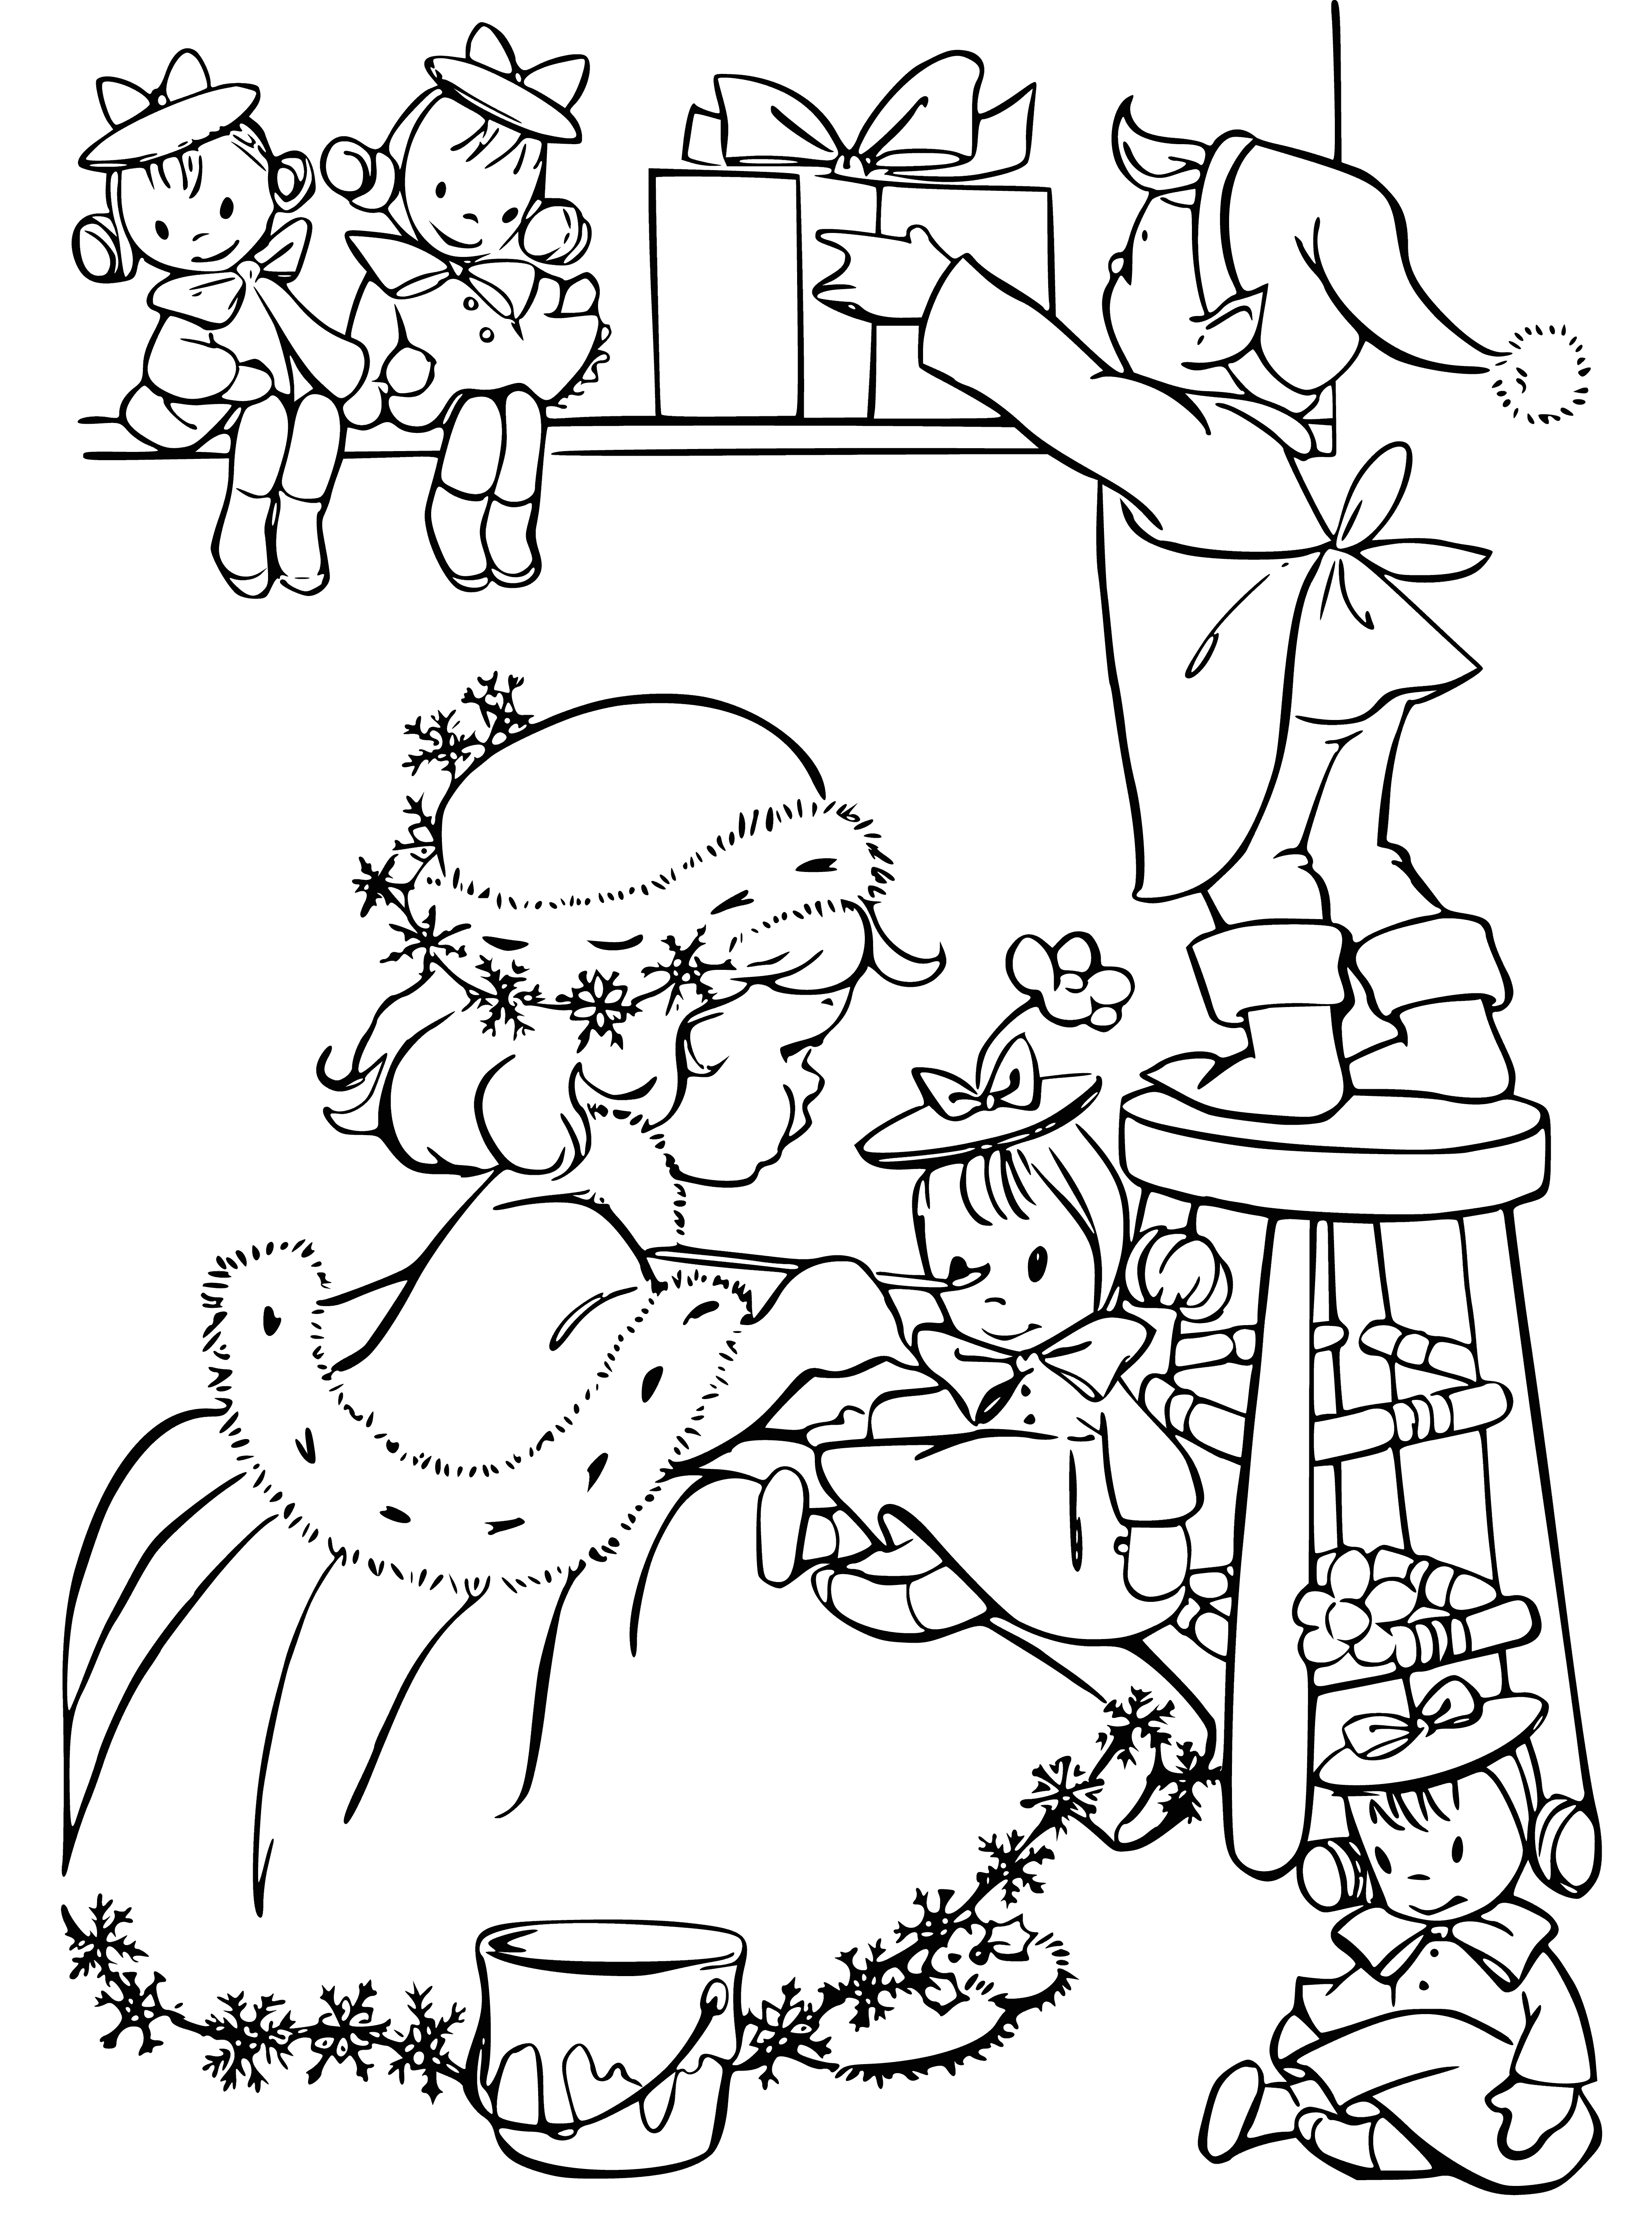 coloring page: Two lg Christmas presents under tree: shiny red with grn bow & bigger blue with yellow bow. Fireplace w/ blazing fire & more presents on mantel & floor. Stocking stuffed full.